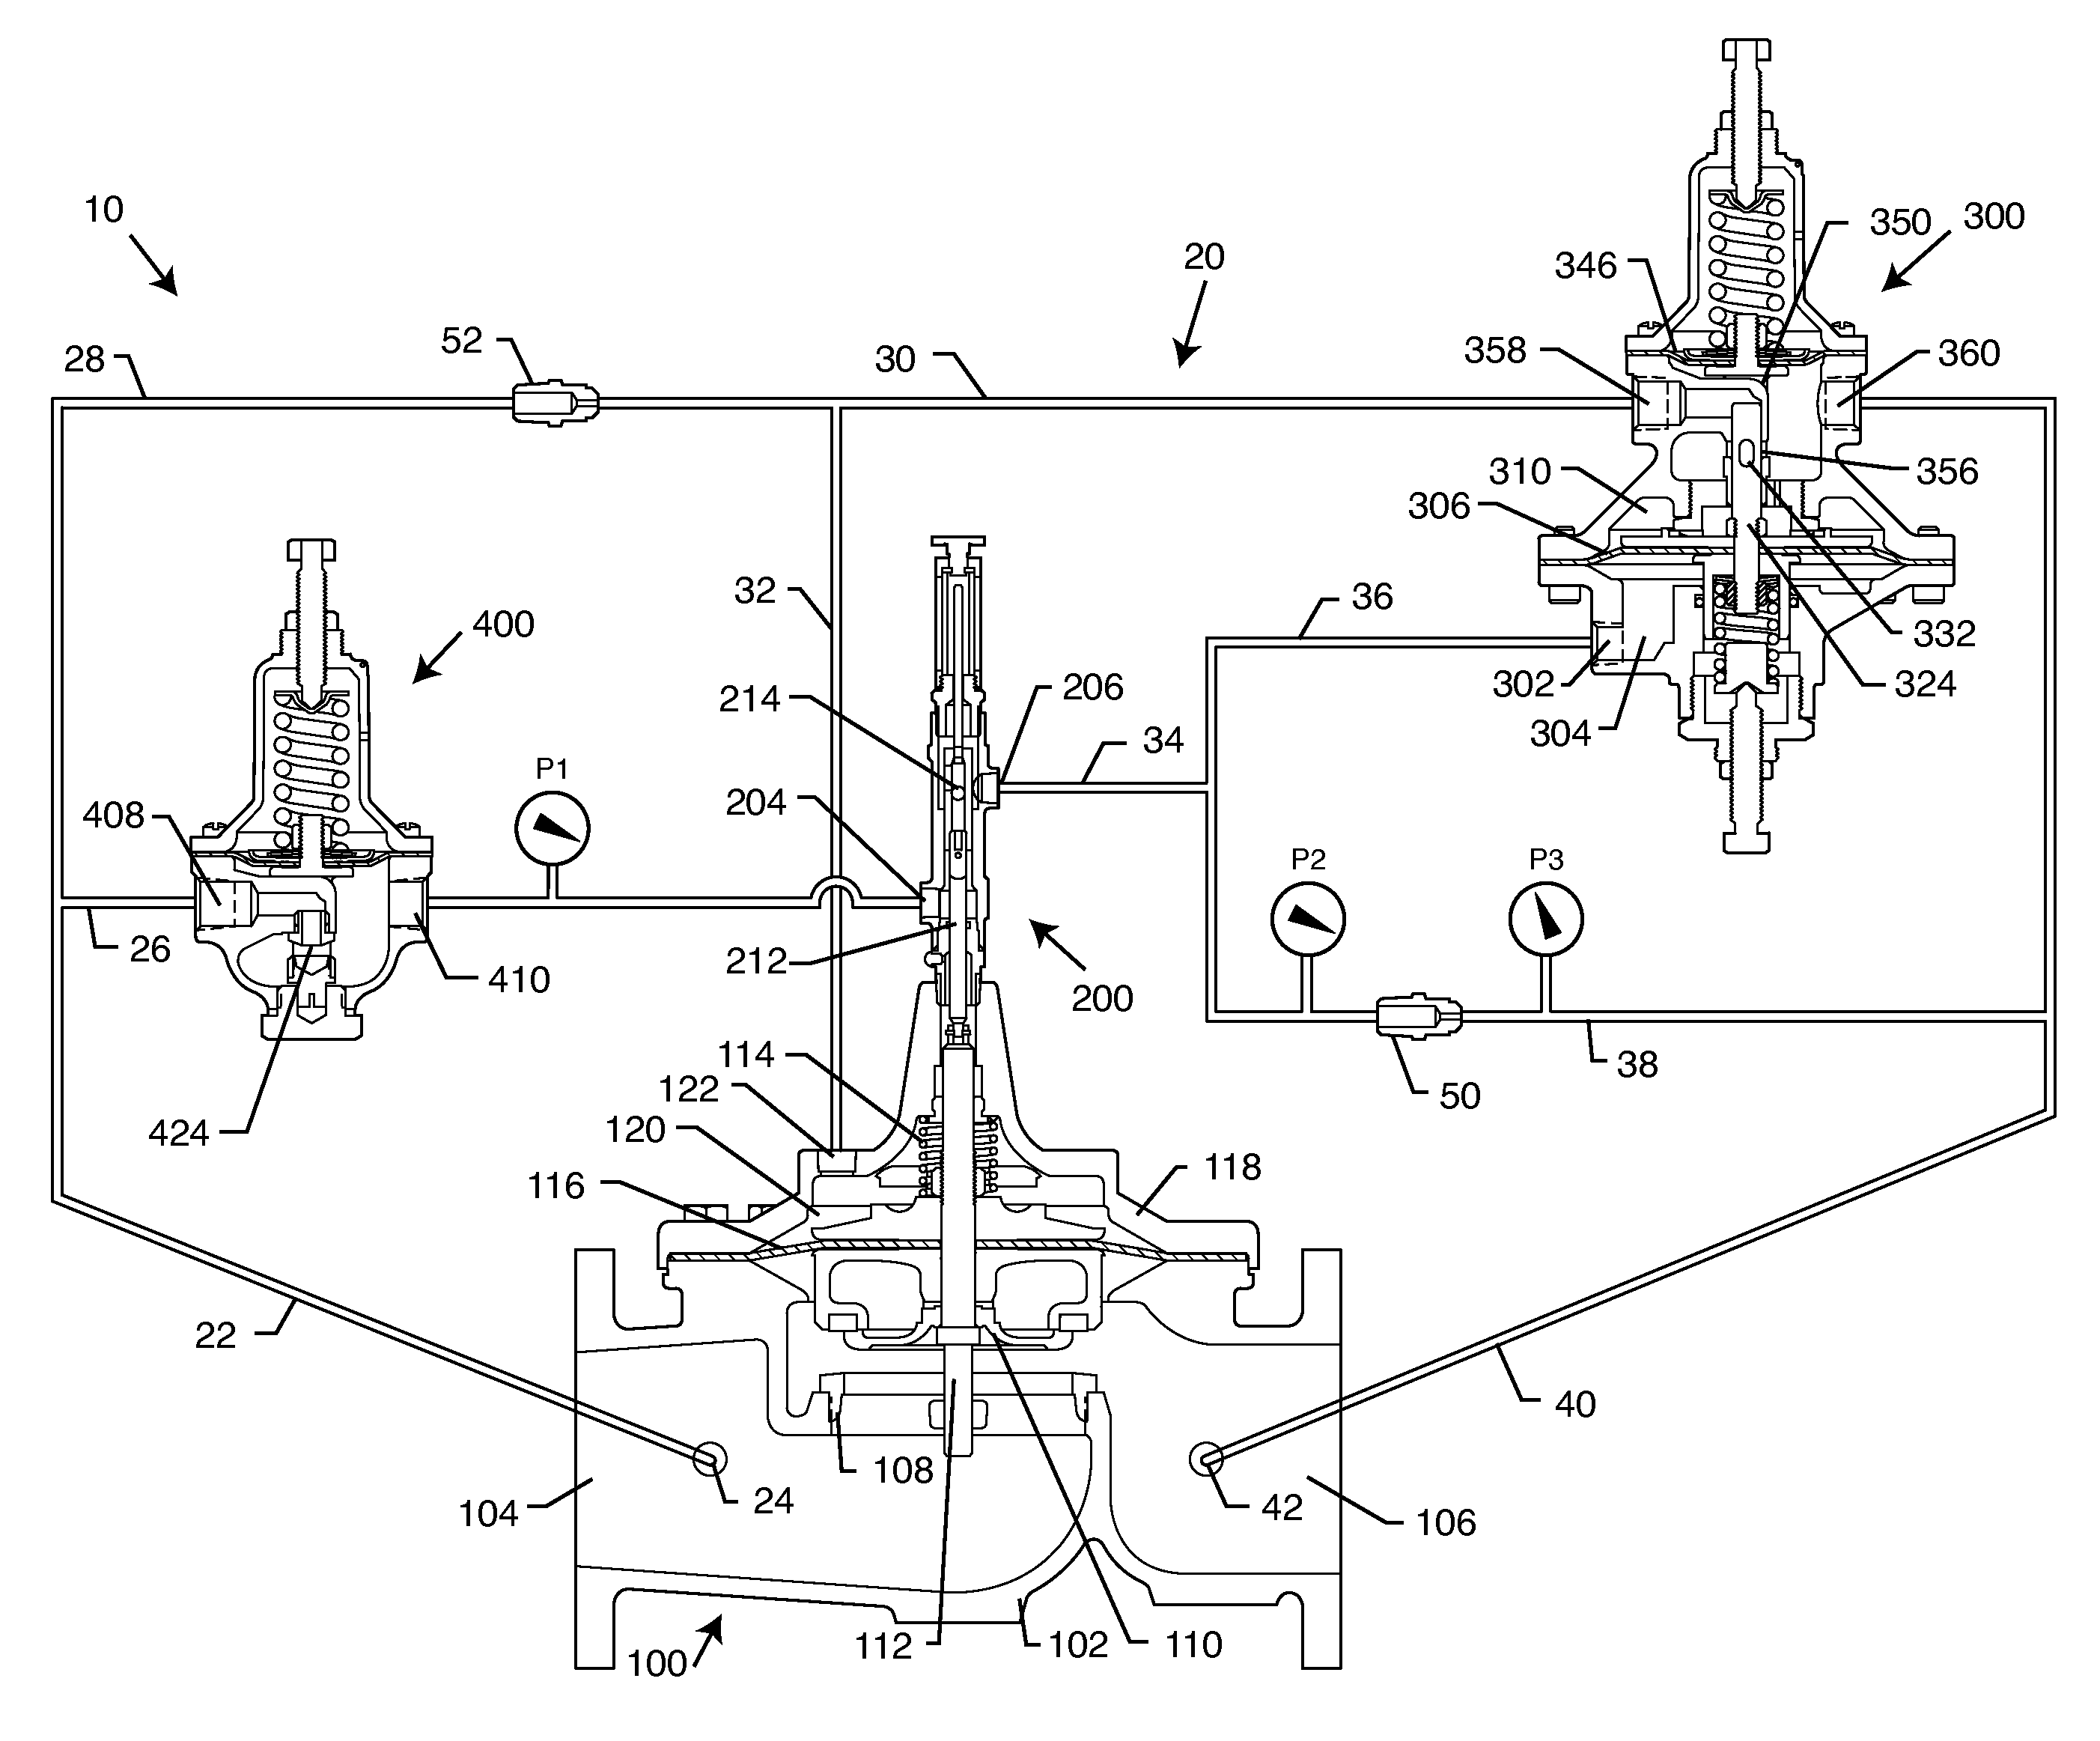 System and method for hydraulically managing fluid pressure downstream from a main valve between set points